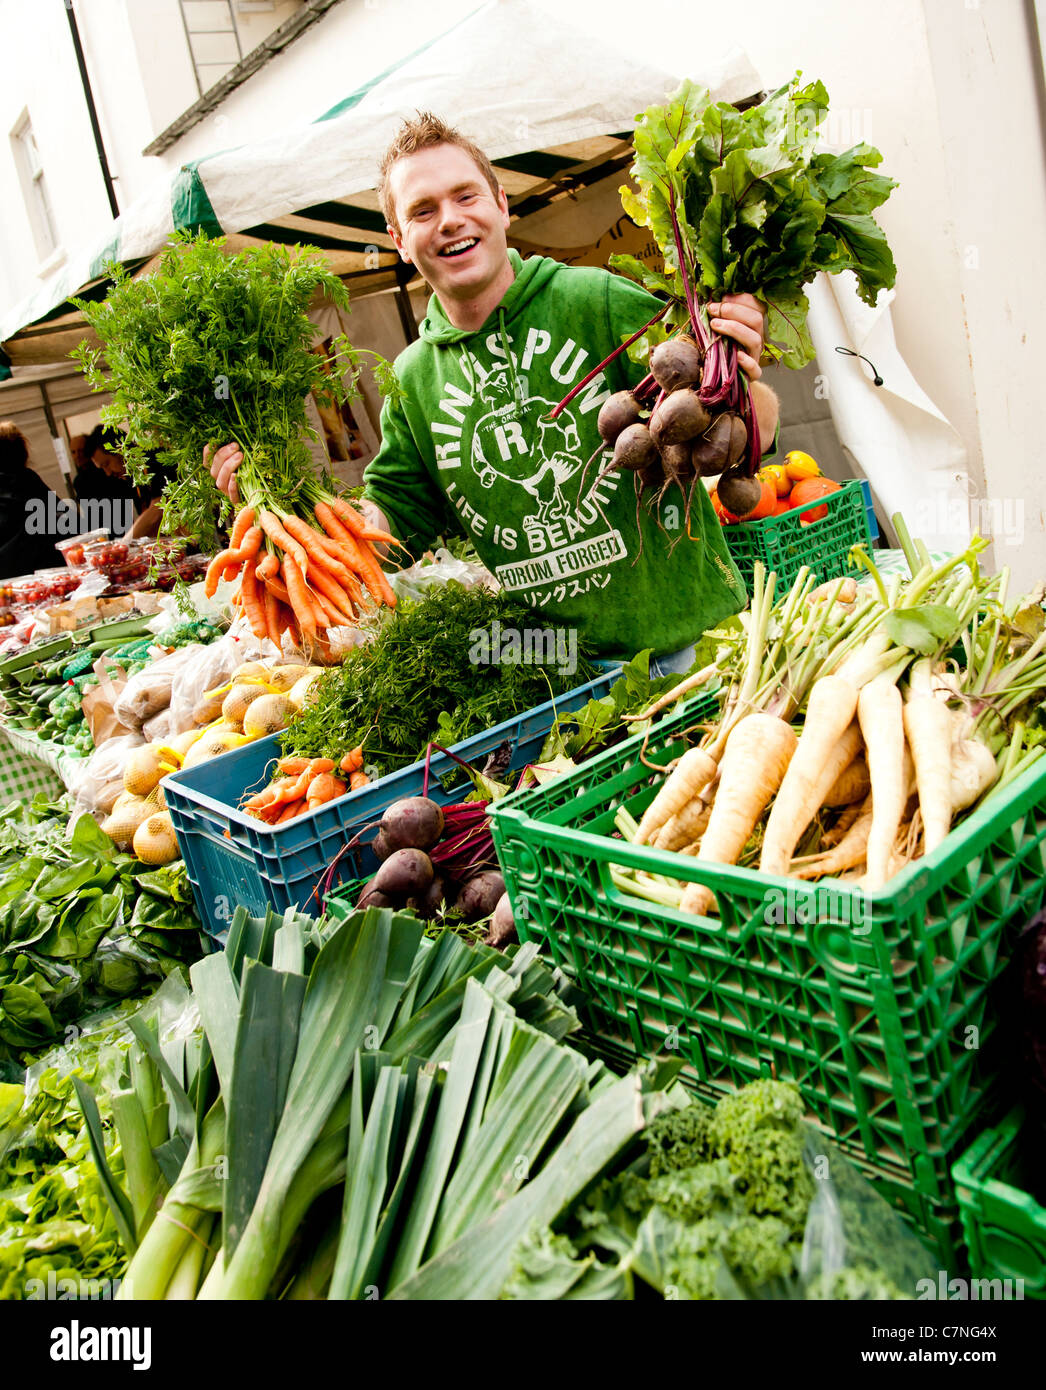 A young man selling Organic locally grown vegetables on sale at Aberystwyth Food Fair, September 2011, Wales UK Stock Photo